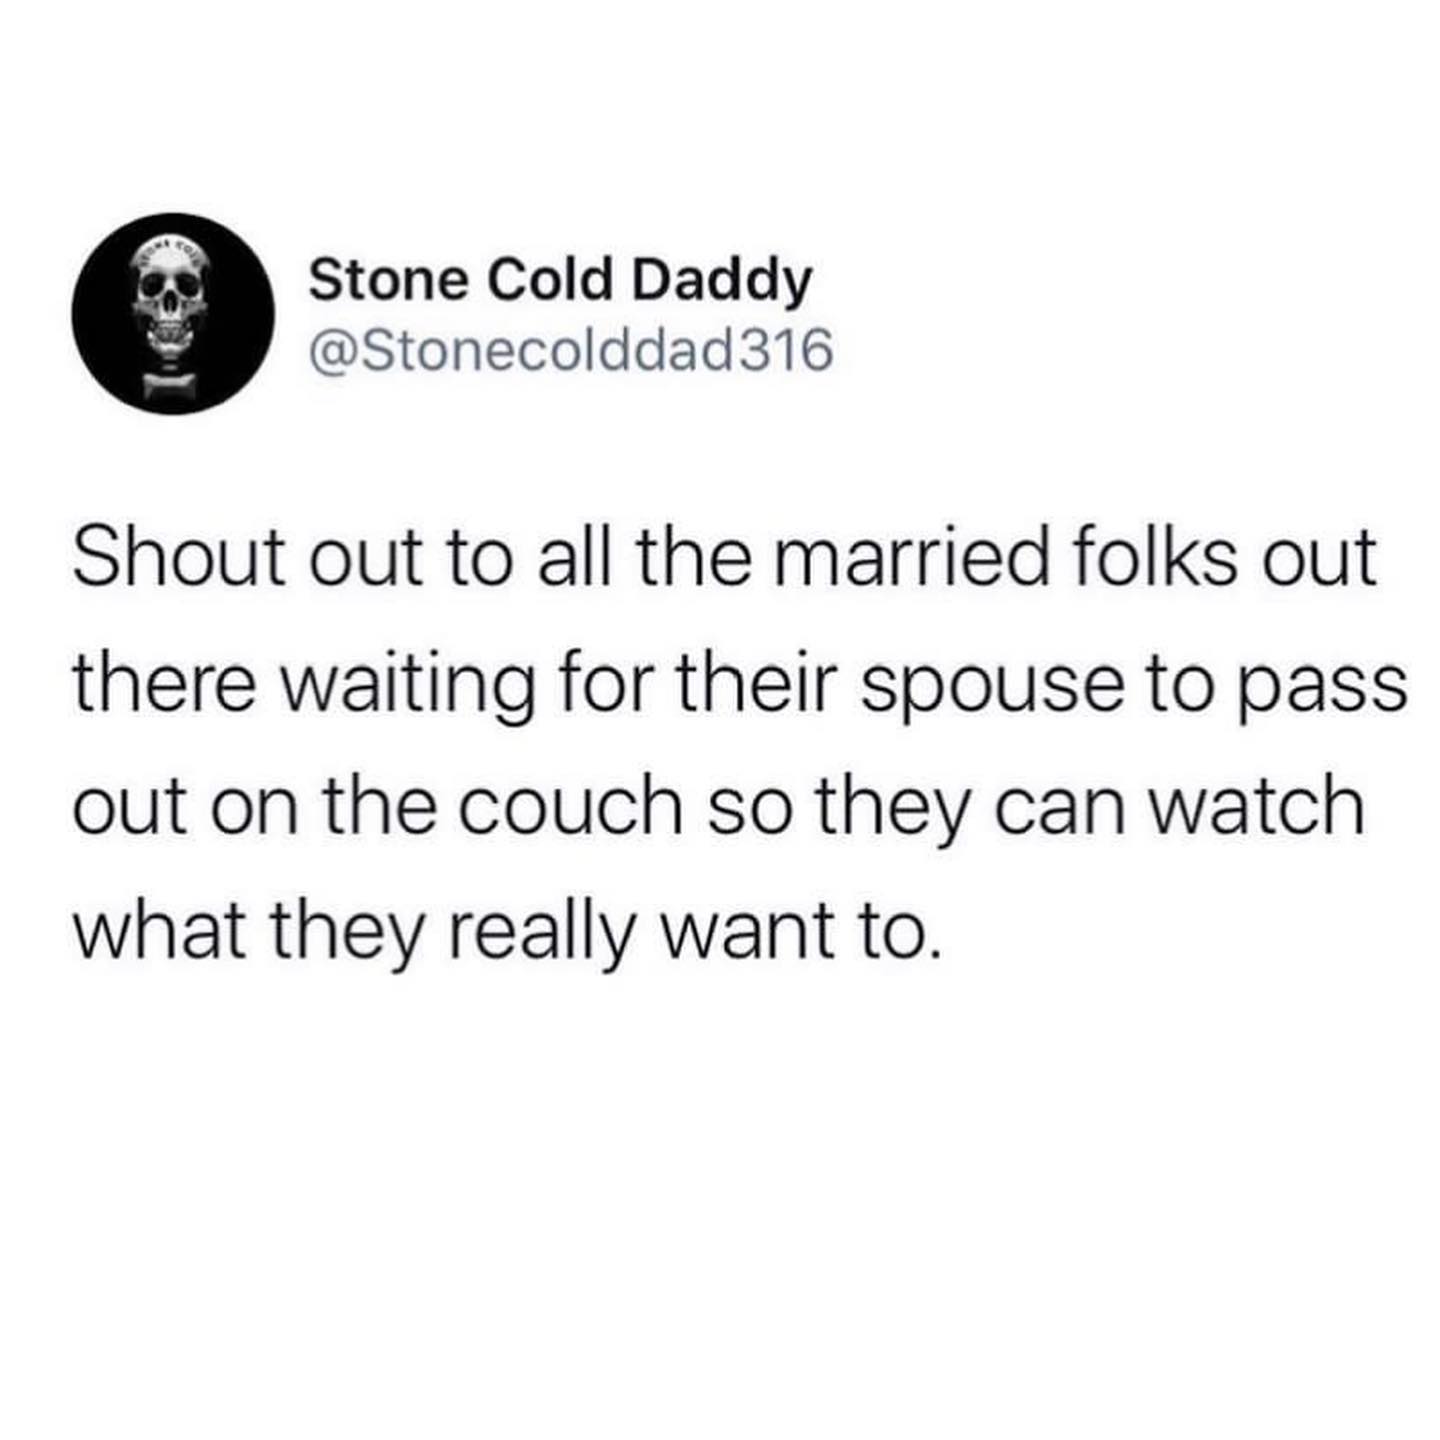 meme: shout out to the married folks waiting for their spouse to pass out so they can watch what they want.